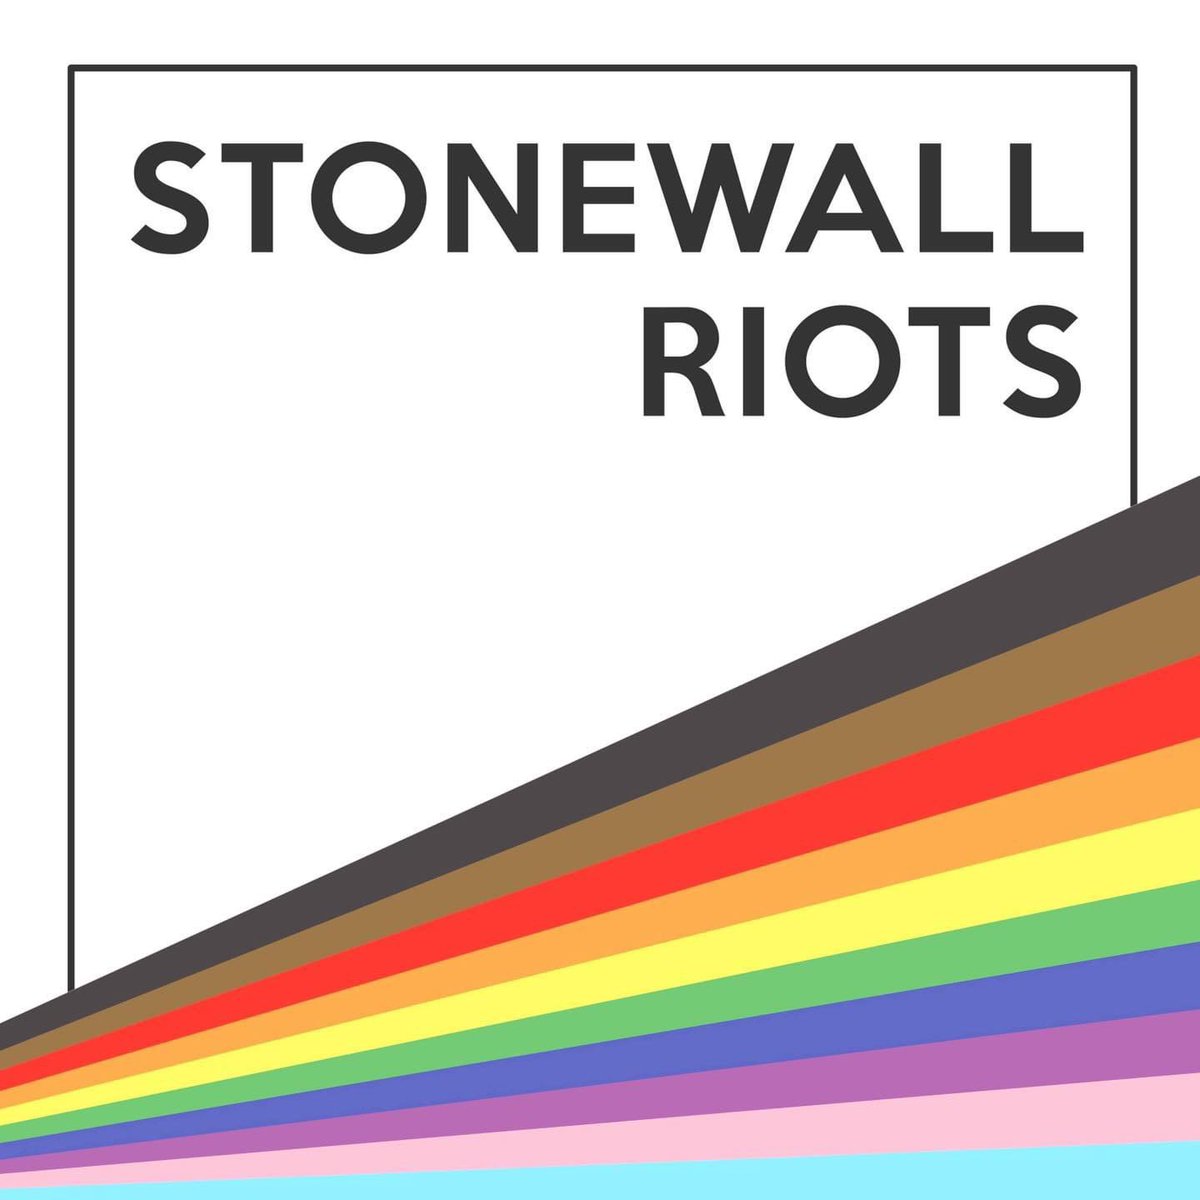 On 28th June 1969, an uprising took place at the Stonewall Inn in New York City. As it was raided by the police in the early hours, three nights of unrest followed, with LGBTQ+ people, long frustrated by police brutality, finally fighting back. 

#Stonewall #StonewallRiots